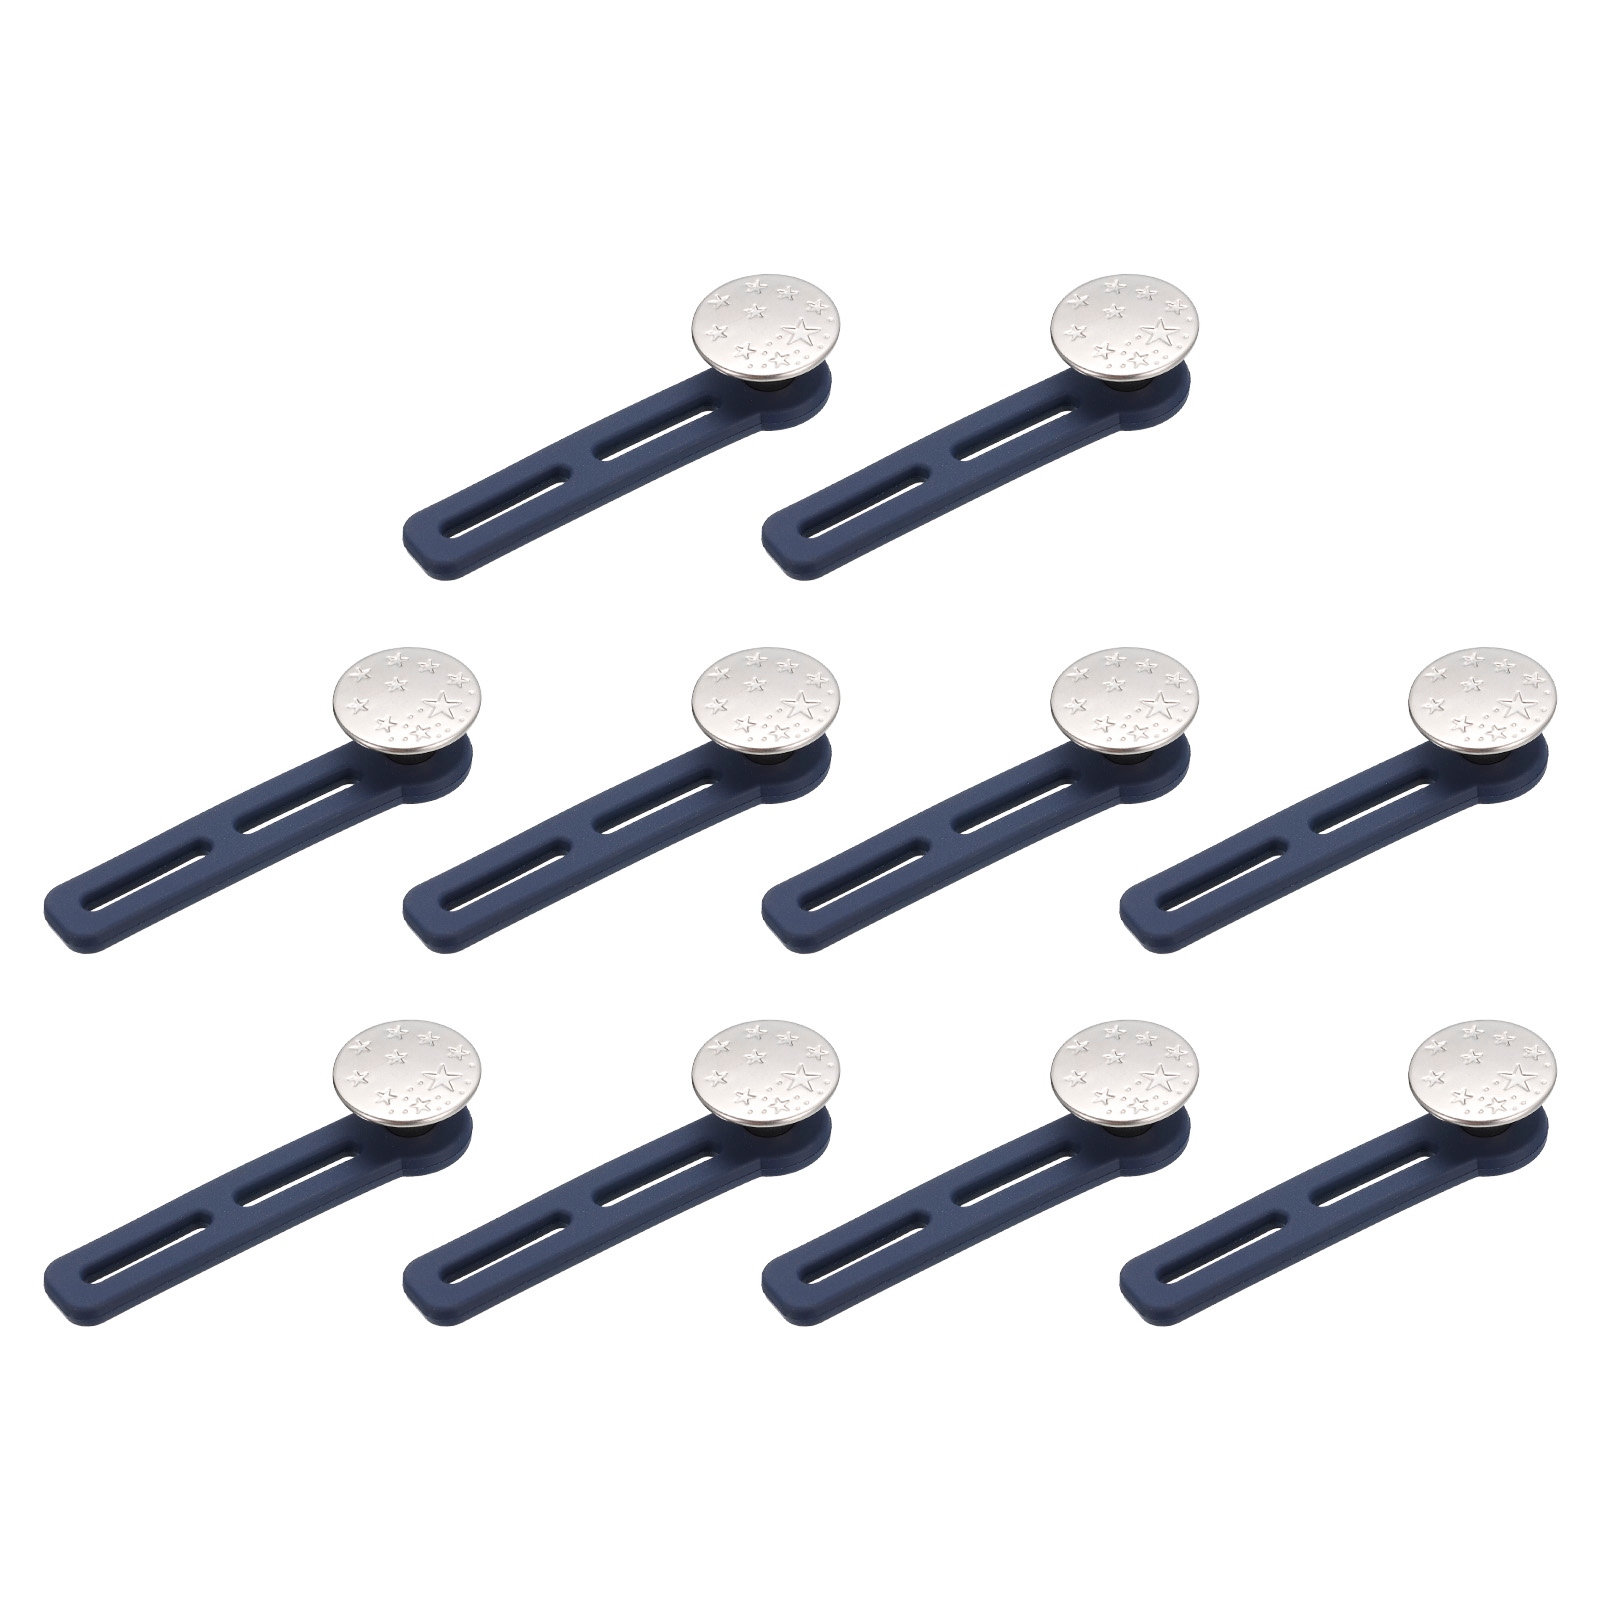 Button Extenders, 10pcs No-Sewing Extend Buttons for Pants Jeans Skirts(Silver) - Silver